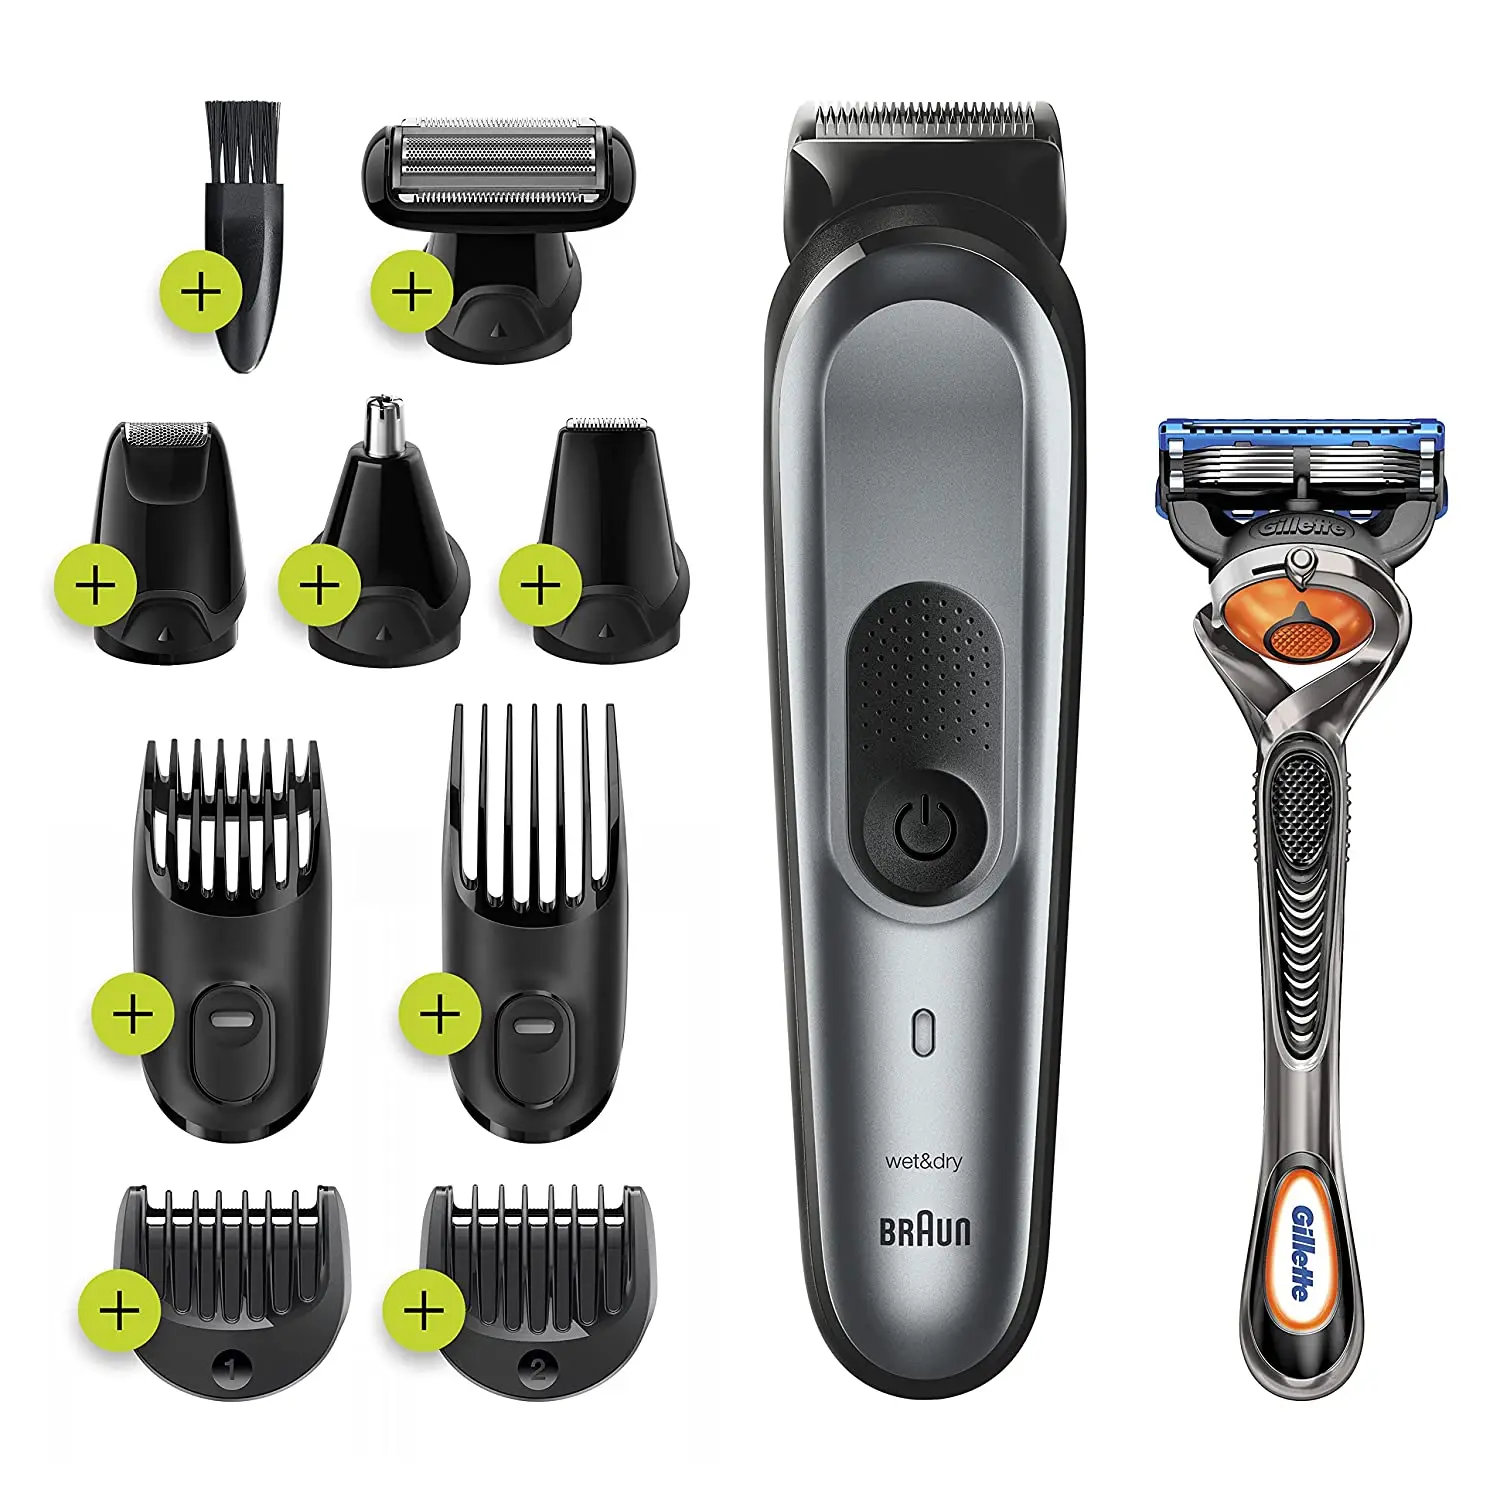 Braun Hair Clippers for Men, MGK7221 10-in-1 Body Grooming Kit, Beard, Ear and Nose Trimmer, Body Groomer and Hair Clipper,Black